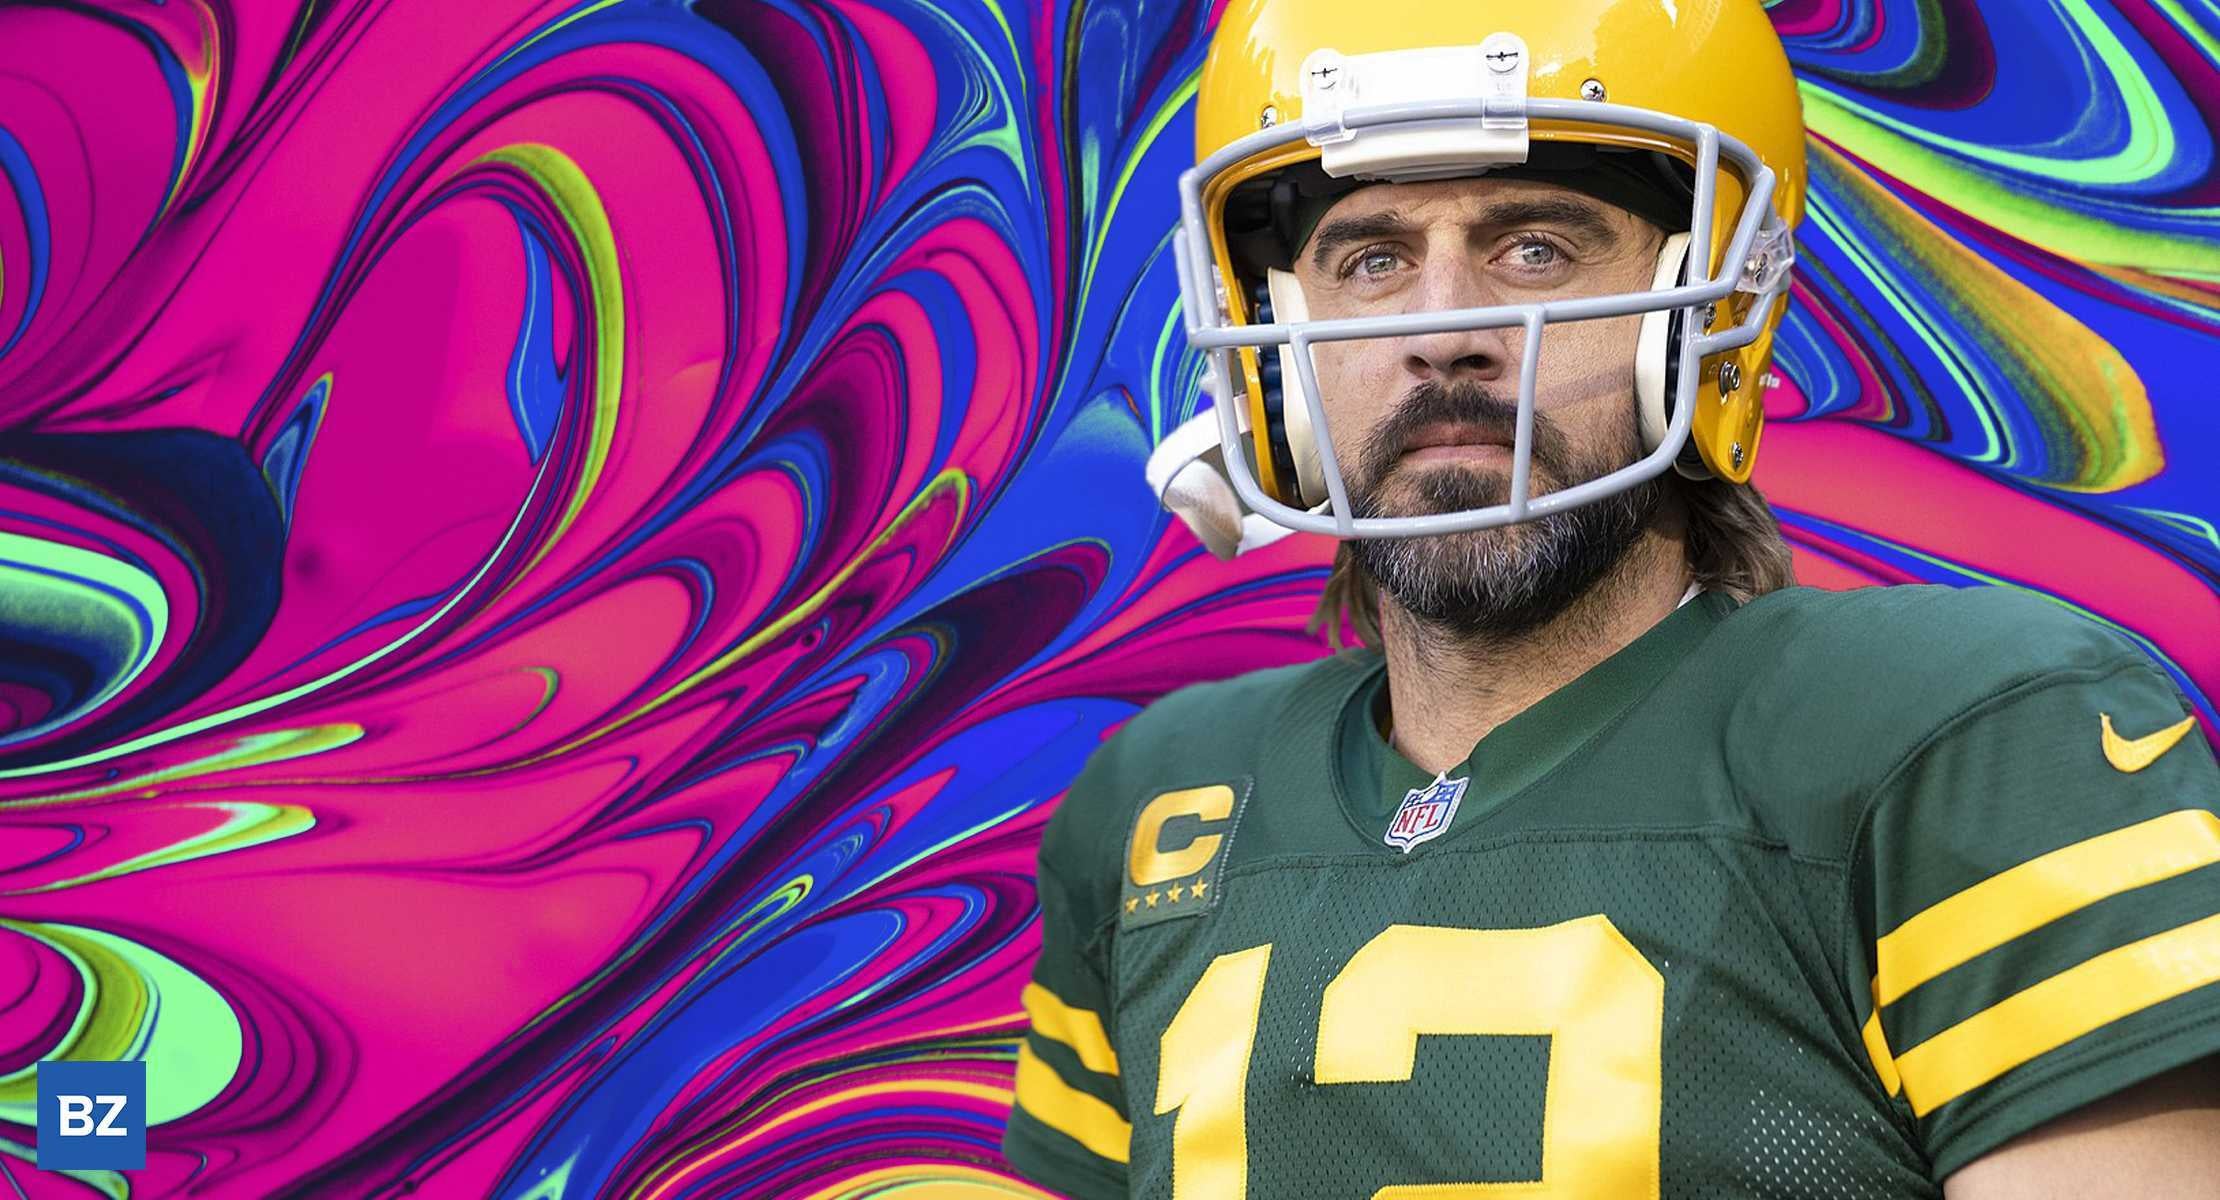 Aaron Rodgers talks about taking ayahuasca at a psychedelics conference